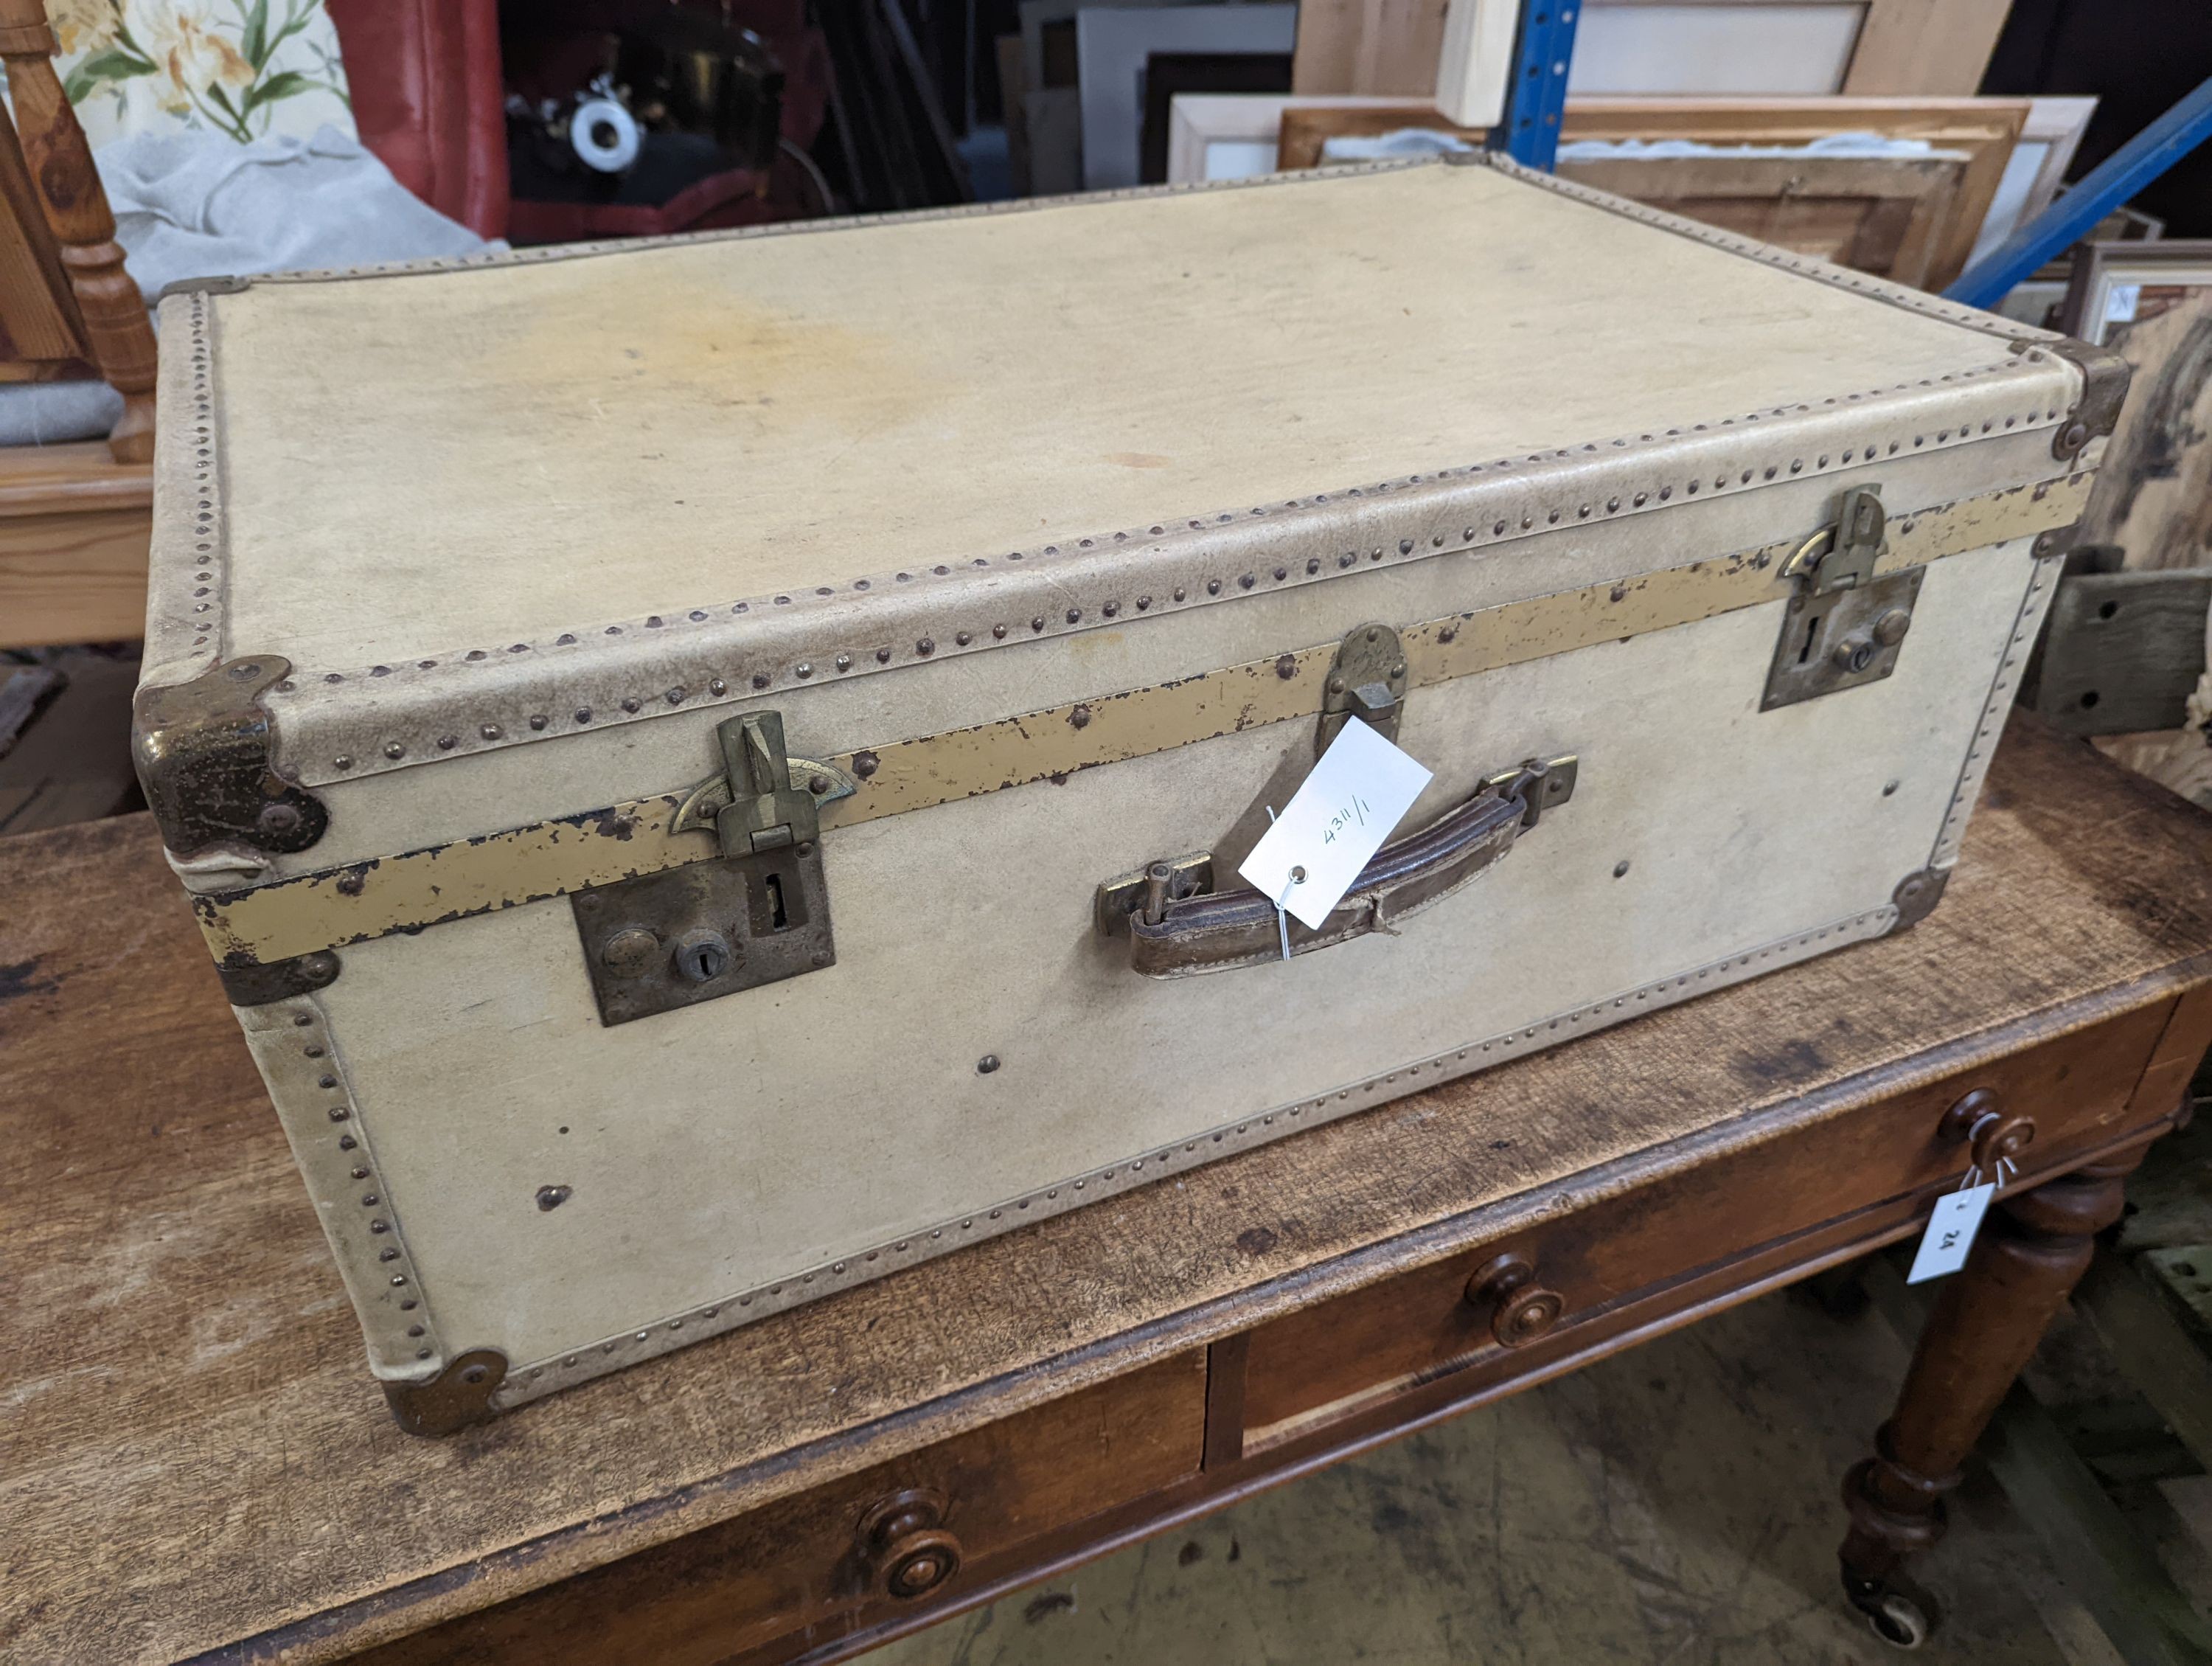 An early 20th century brass mounted vellum suitcase, length 75cm, depth 48cm, height 30cm